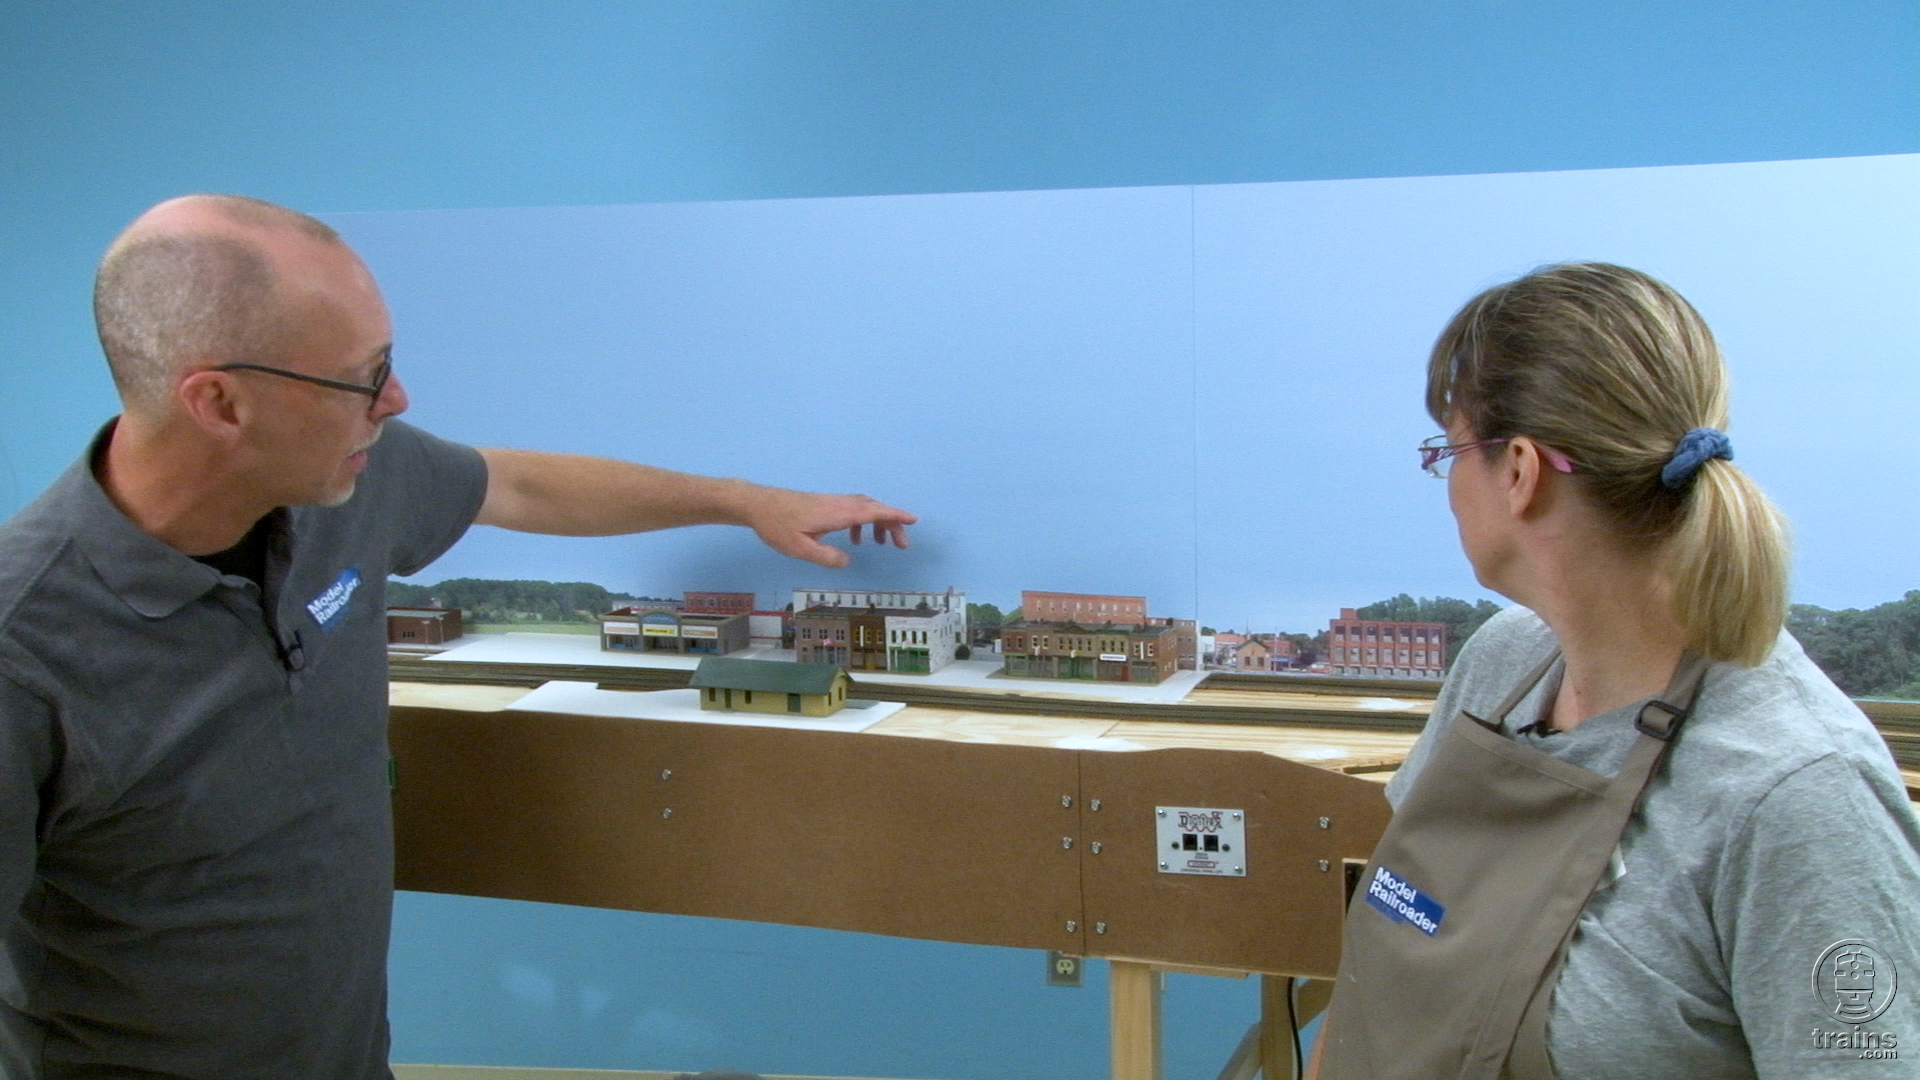 State Line Route in N scale: Painting a backdrop and adding horizon lines, Episode 13